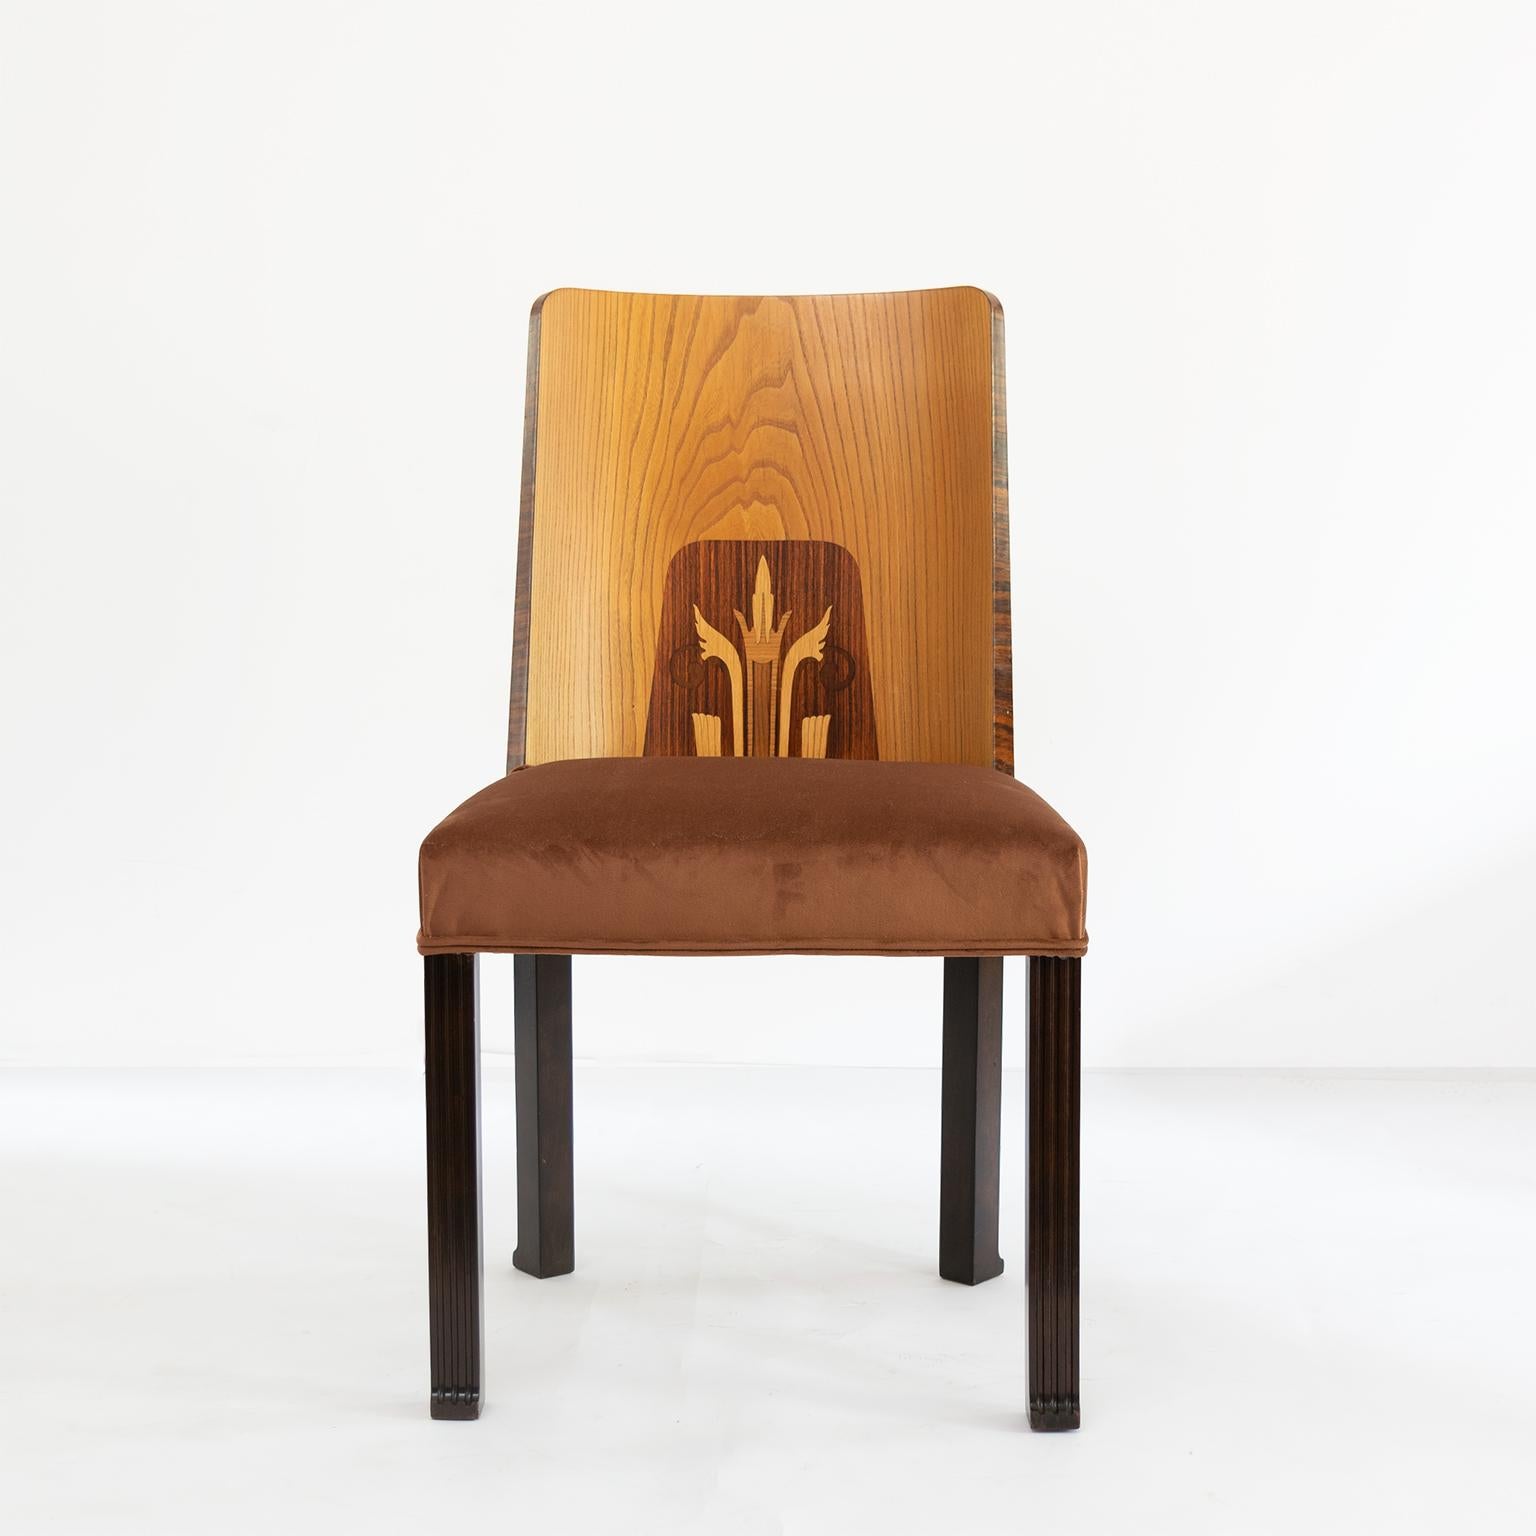 Erik Chambert set of 6 Swedish Art Deco side chairs. Designed in the late 1920s-early 1930s these chairs have rectangular carved legs with stylized feet. The inner backs have a variety of woods including elm and rosewood depicting a symmetrical